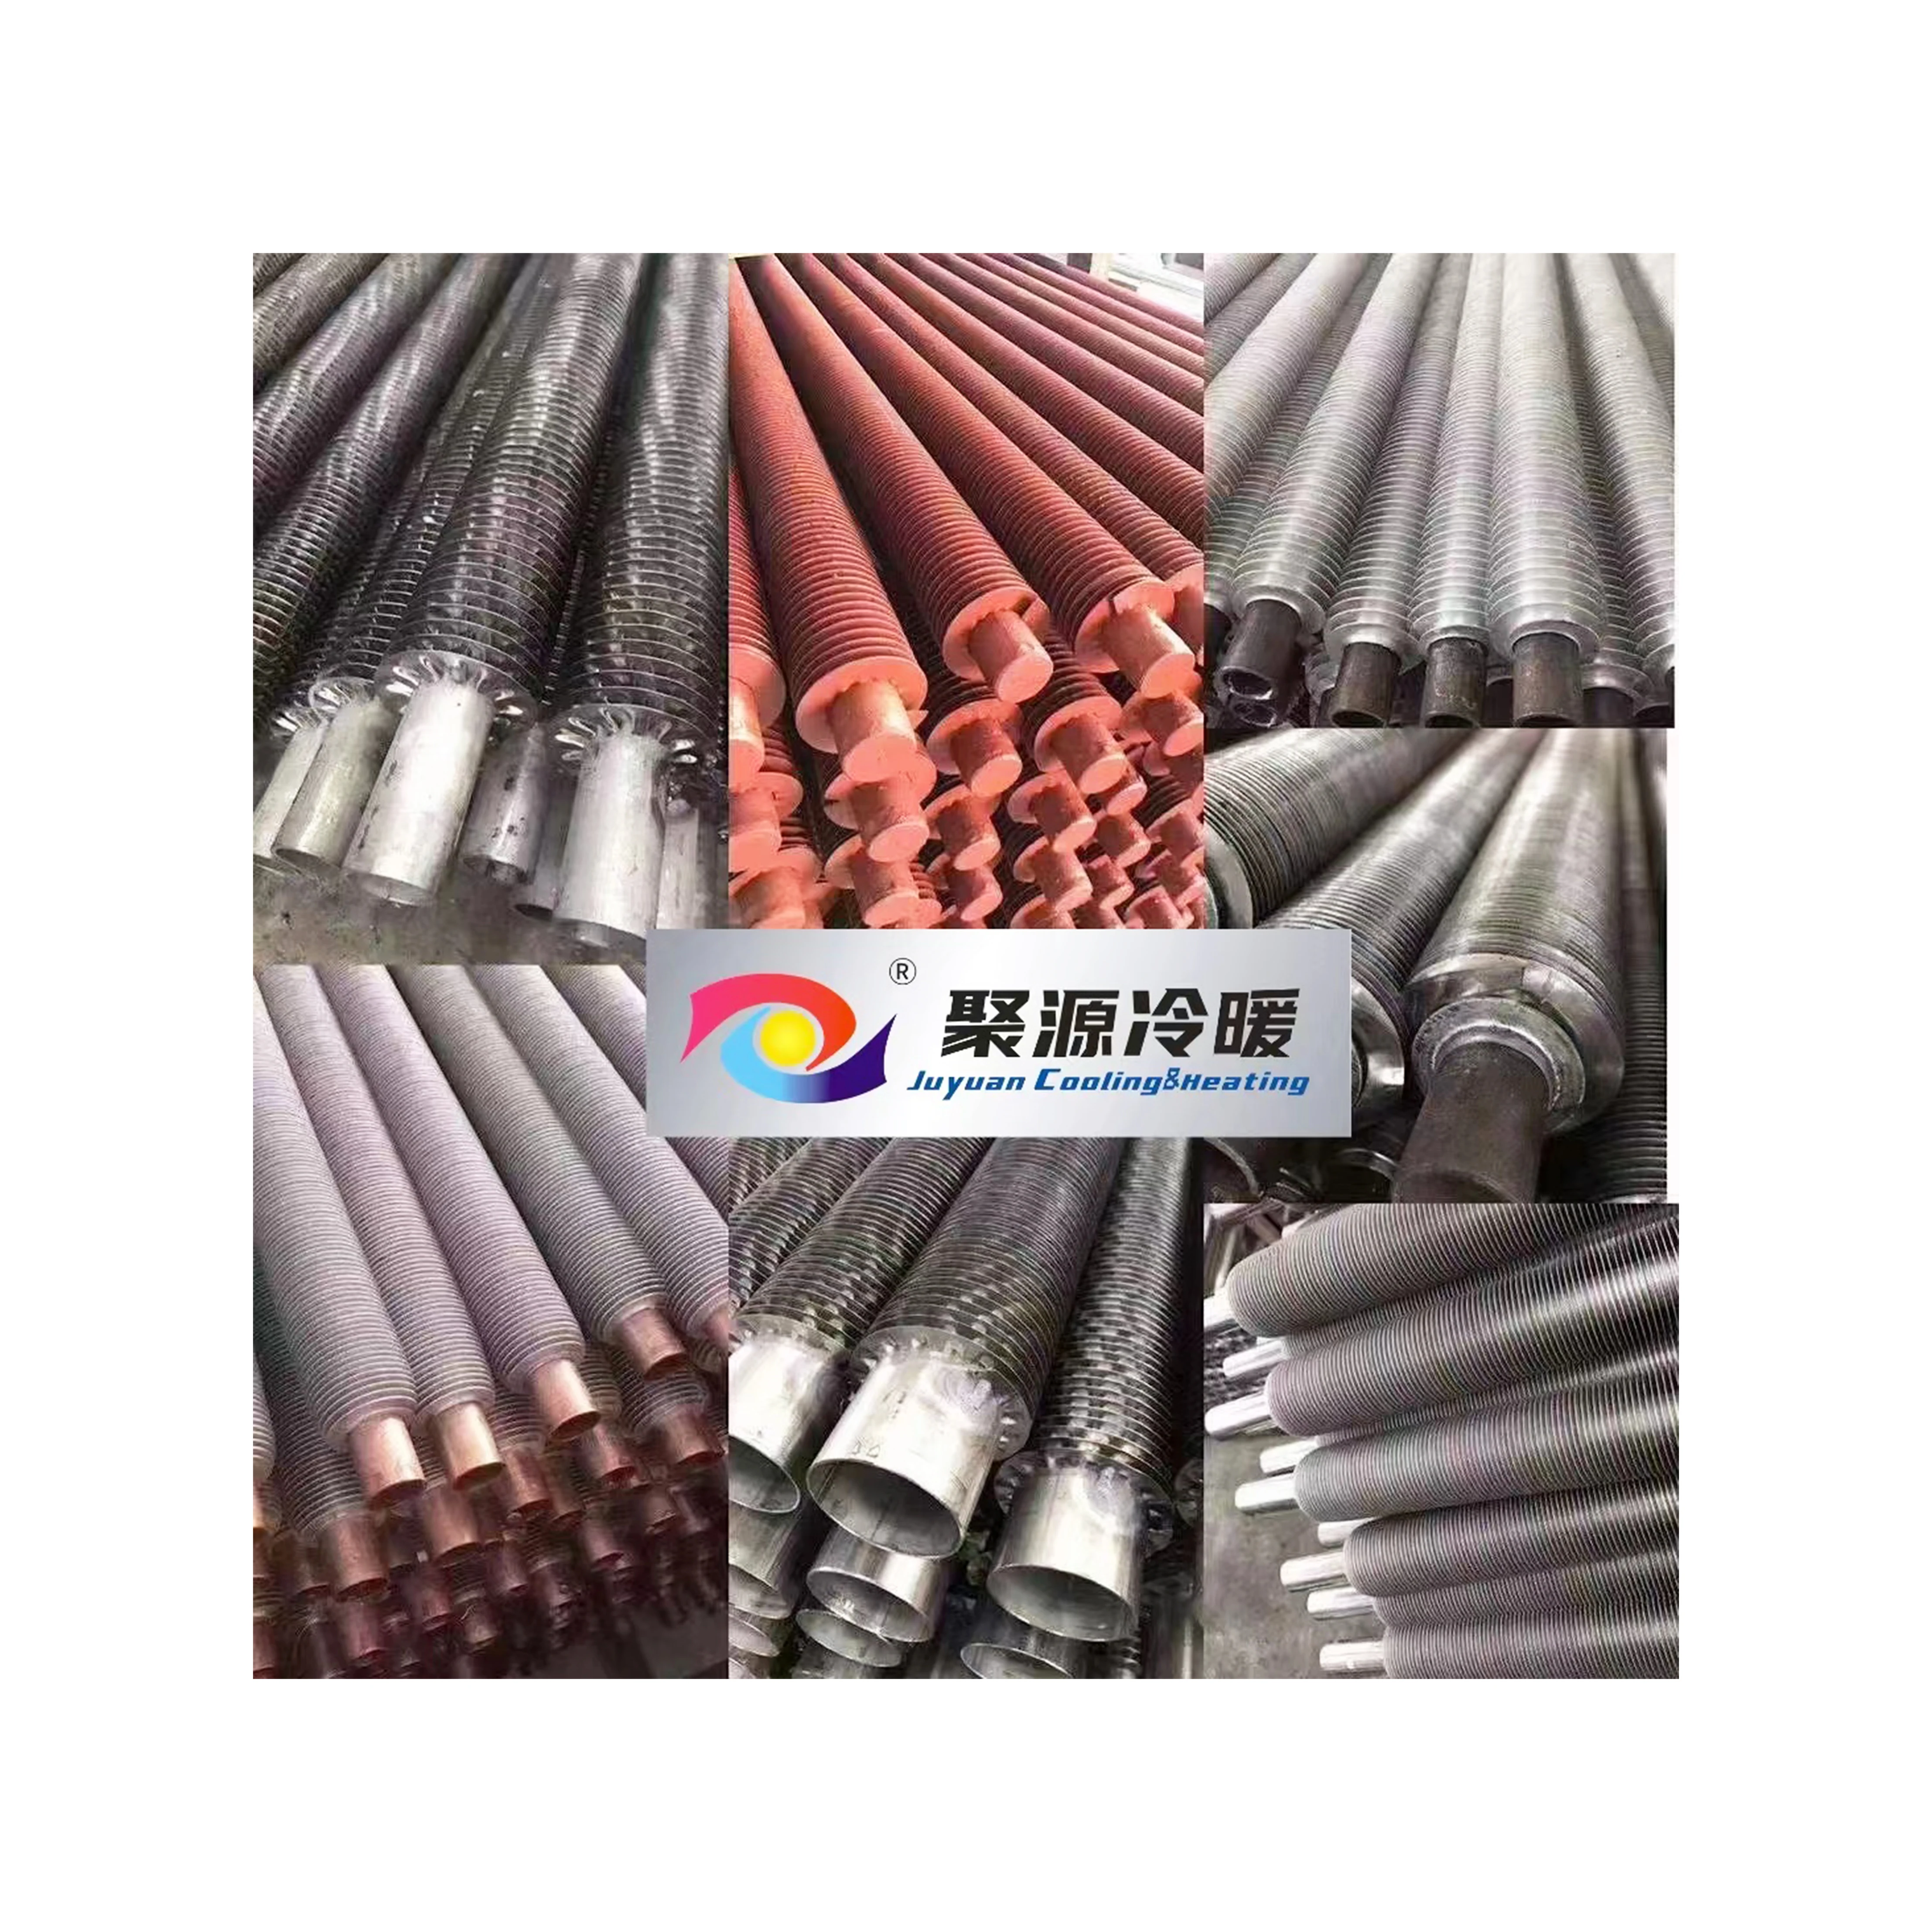 High Frequency Aluminium Spiral Fin Welded Economical Extruded Stainless Steel Finned Tube Air Cooler